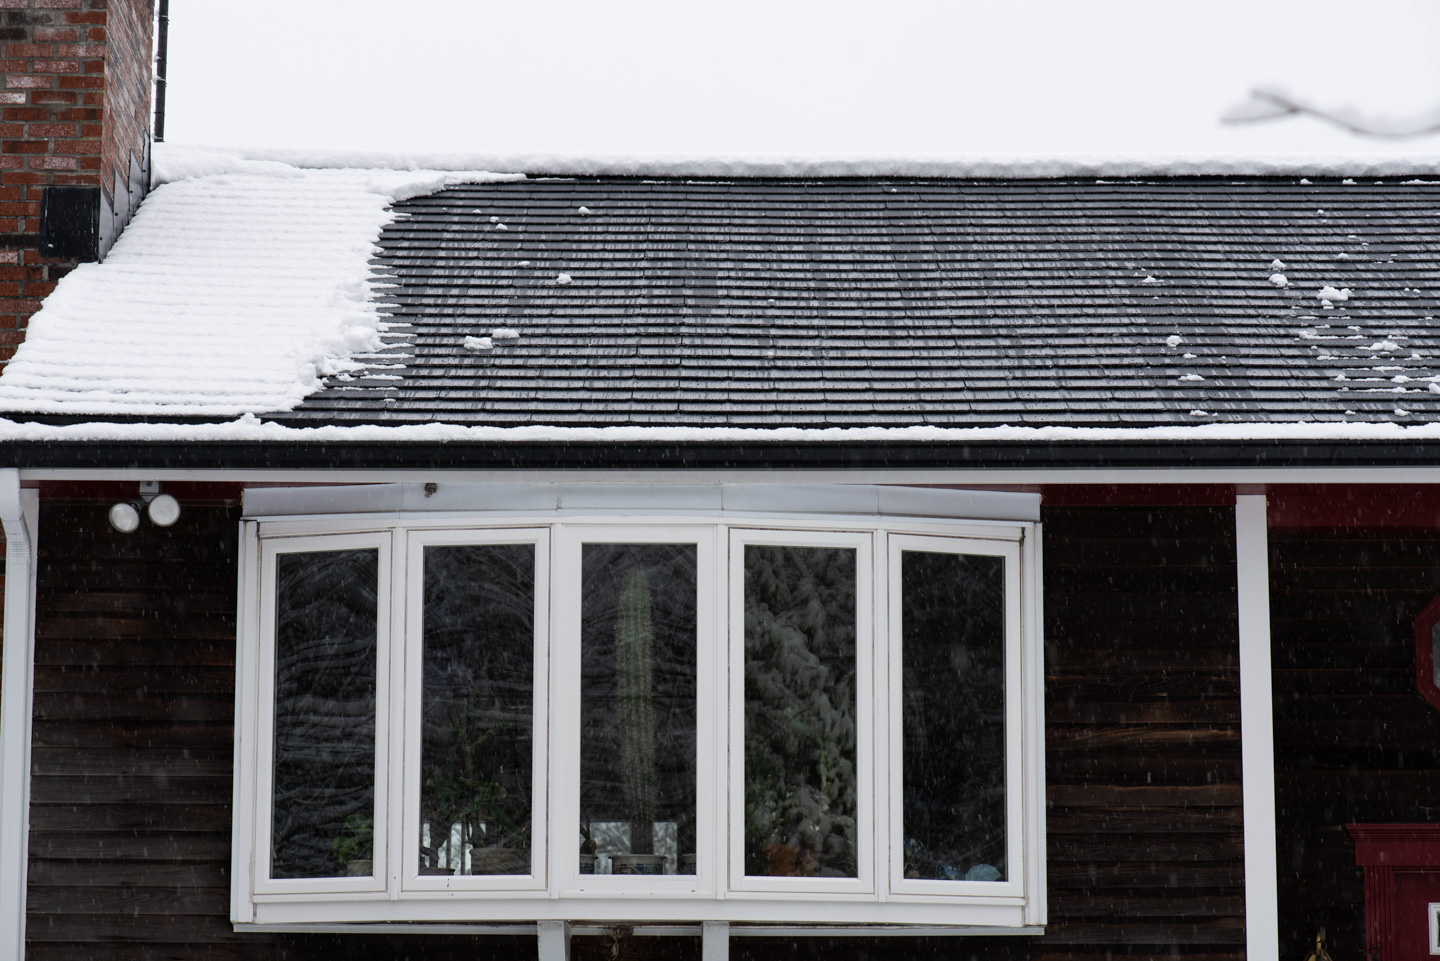 Our roof with only a bit of snow left on it